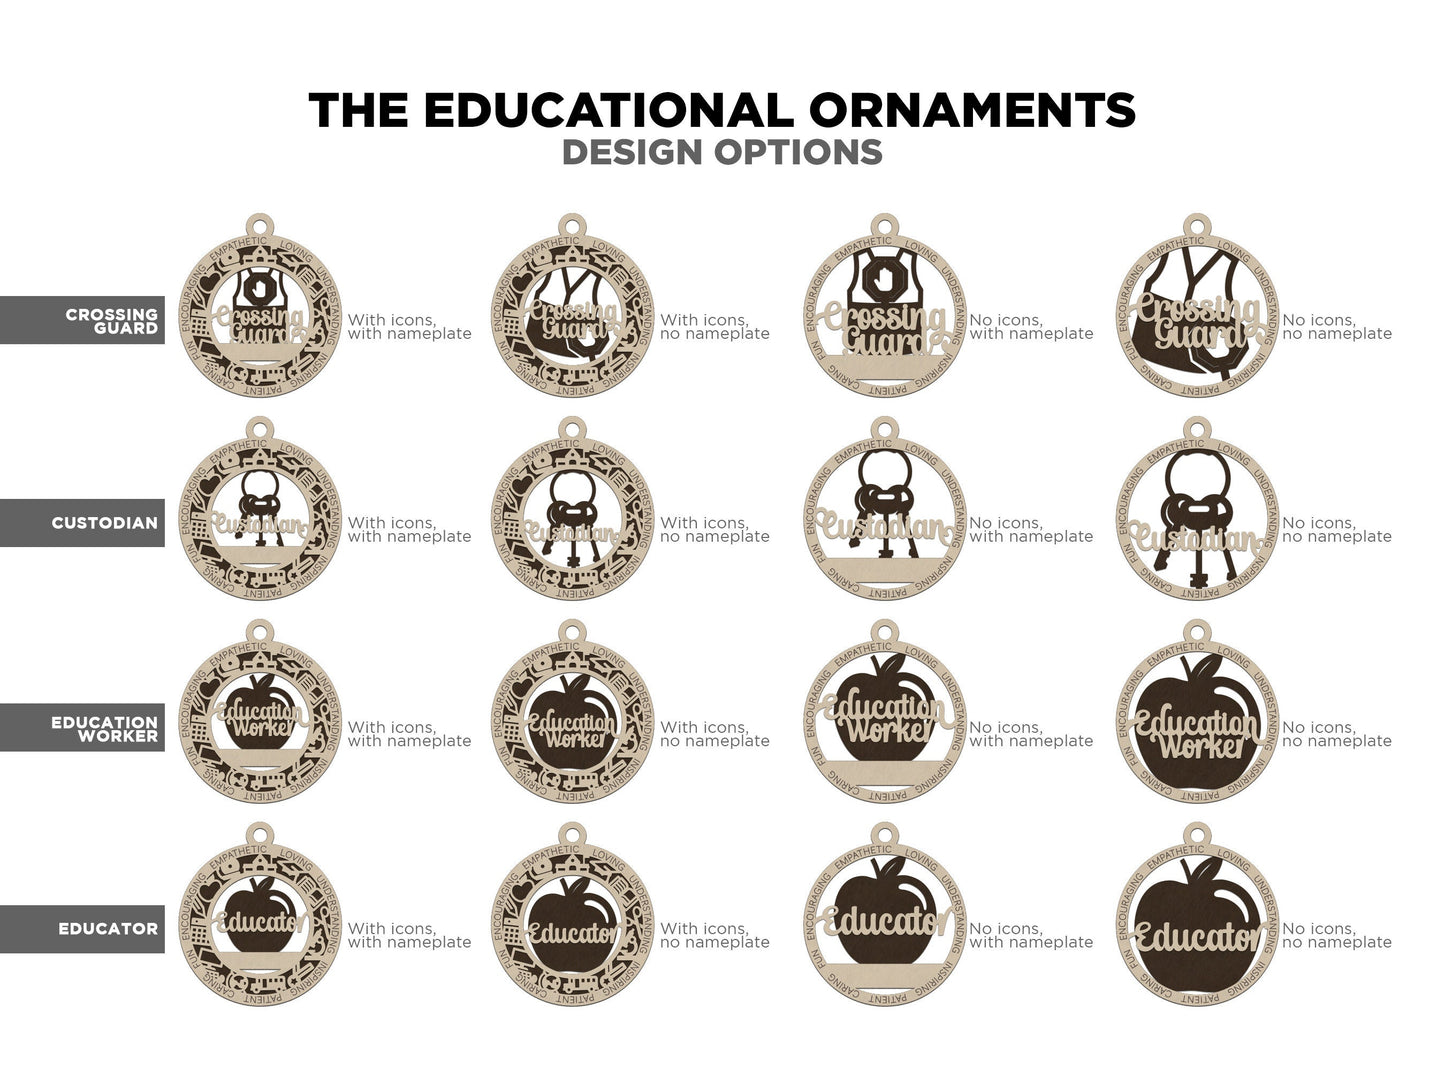 The Educational Ornaments - 16 Unique designs in 4 Styles - SVG, PDF, AI File Download - Tested in Glowforge & Lightburn